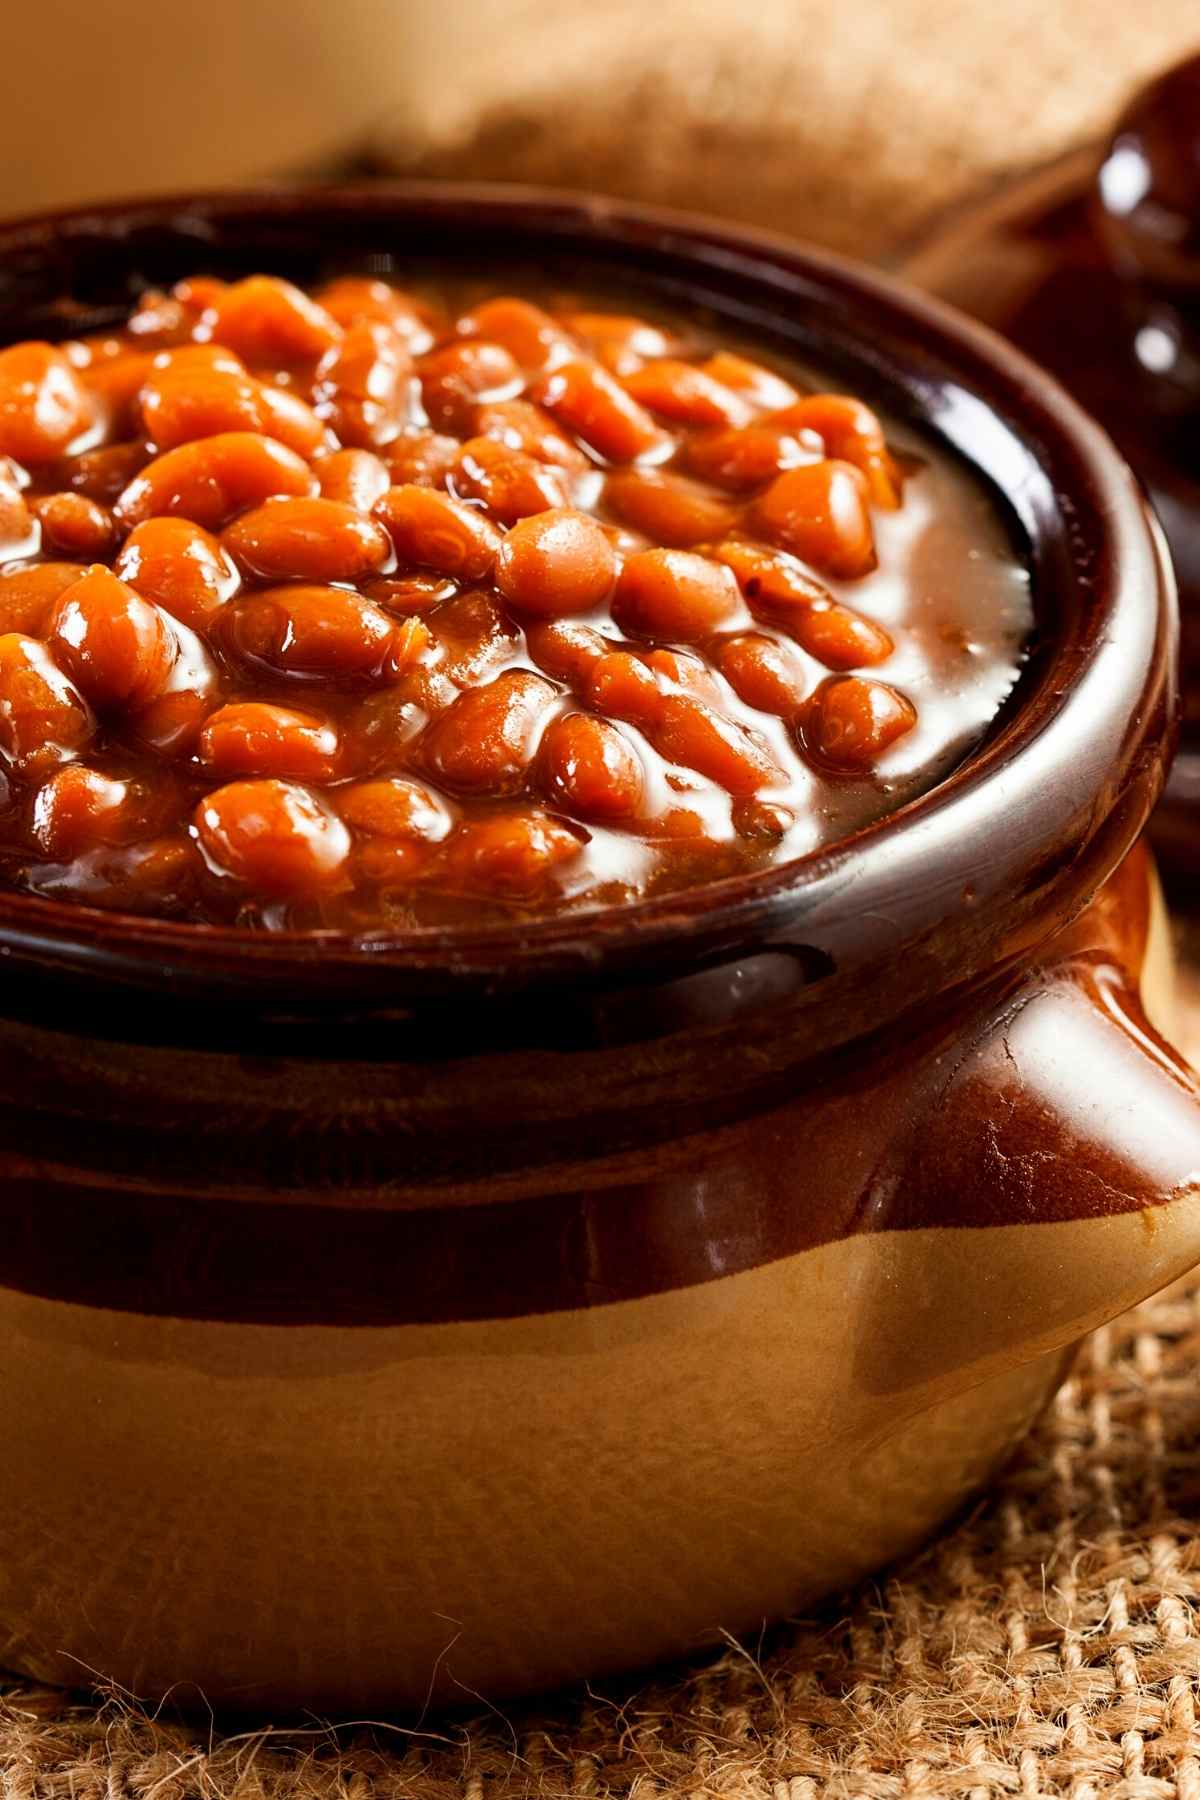 This easy, tasty, and affordable meal idea is one your whole family is sure to love. Made with hearty pinto beans, rich spices, and savory gravy, this meal is so easy to prepare. Simmer on the stovetop or plan ahead with a crock pot. Either way, this meal is always a hit.